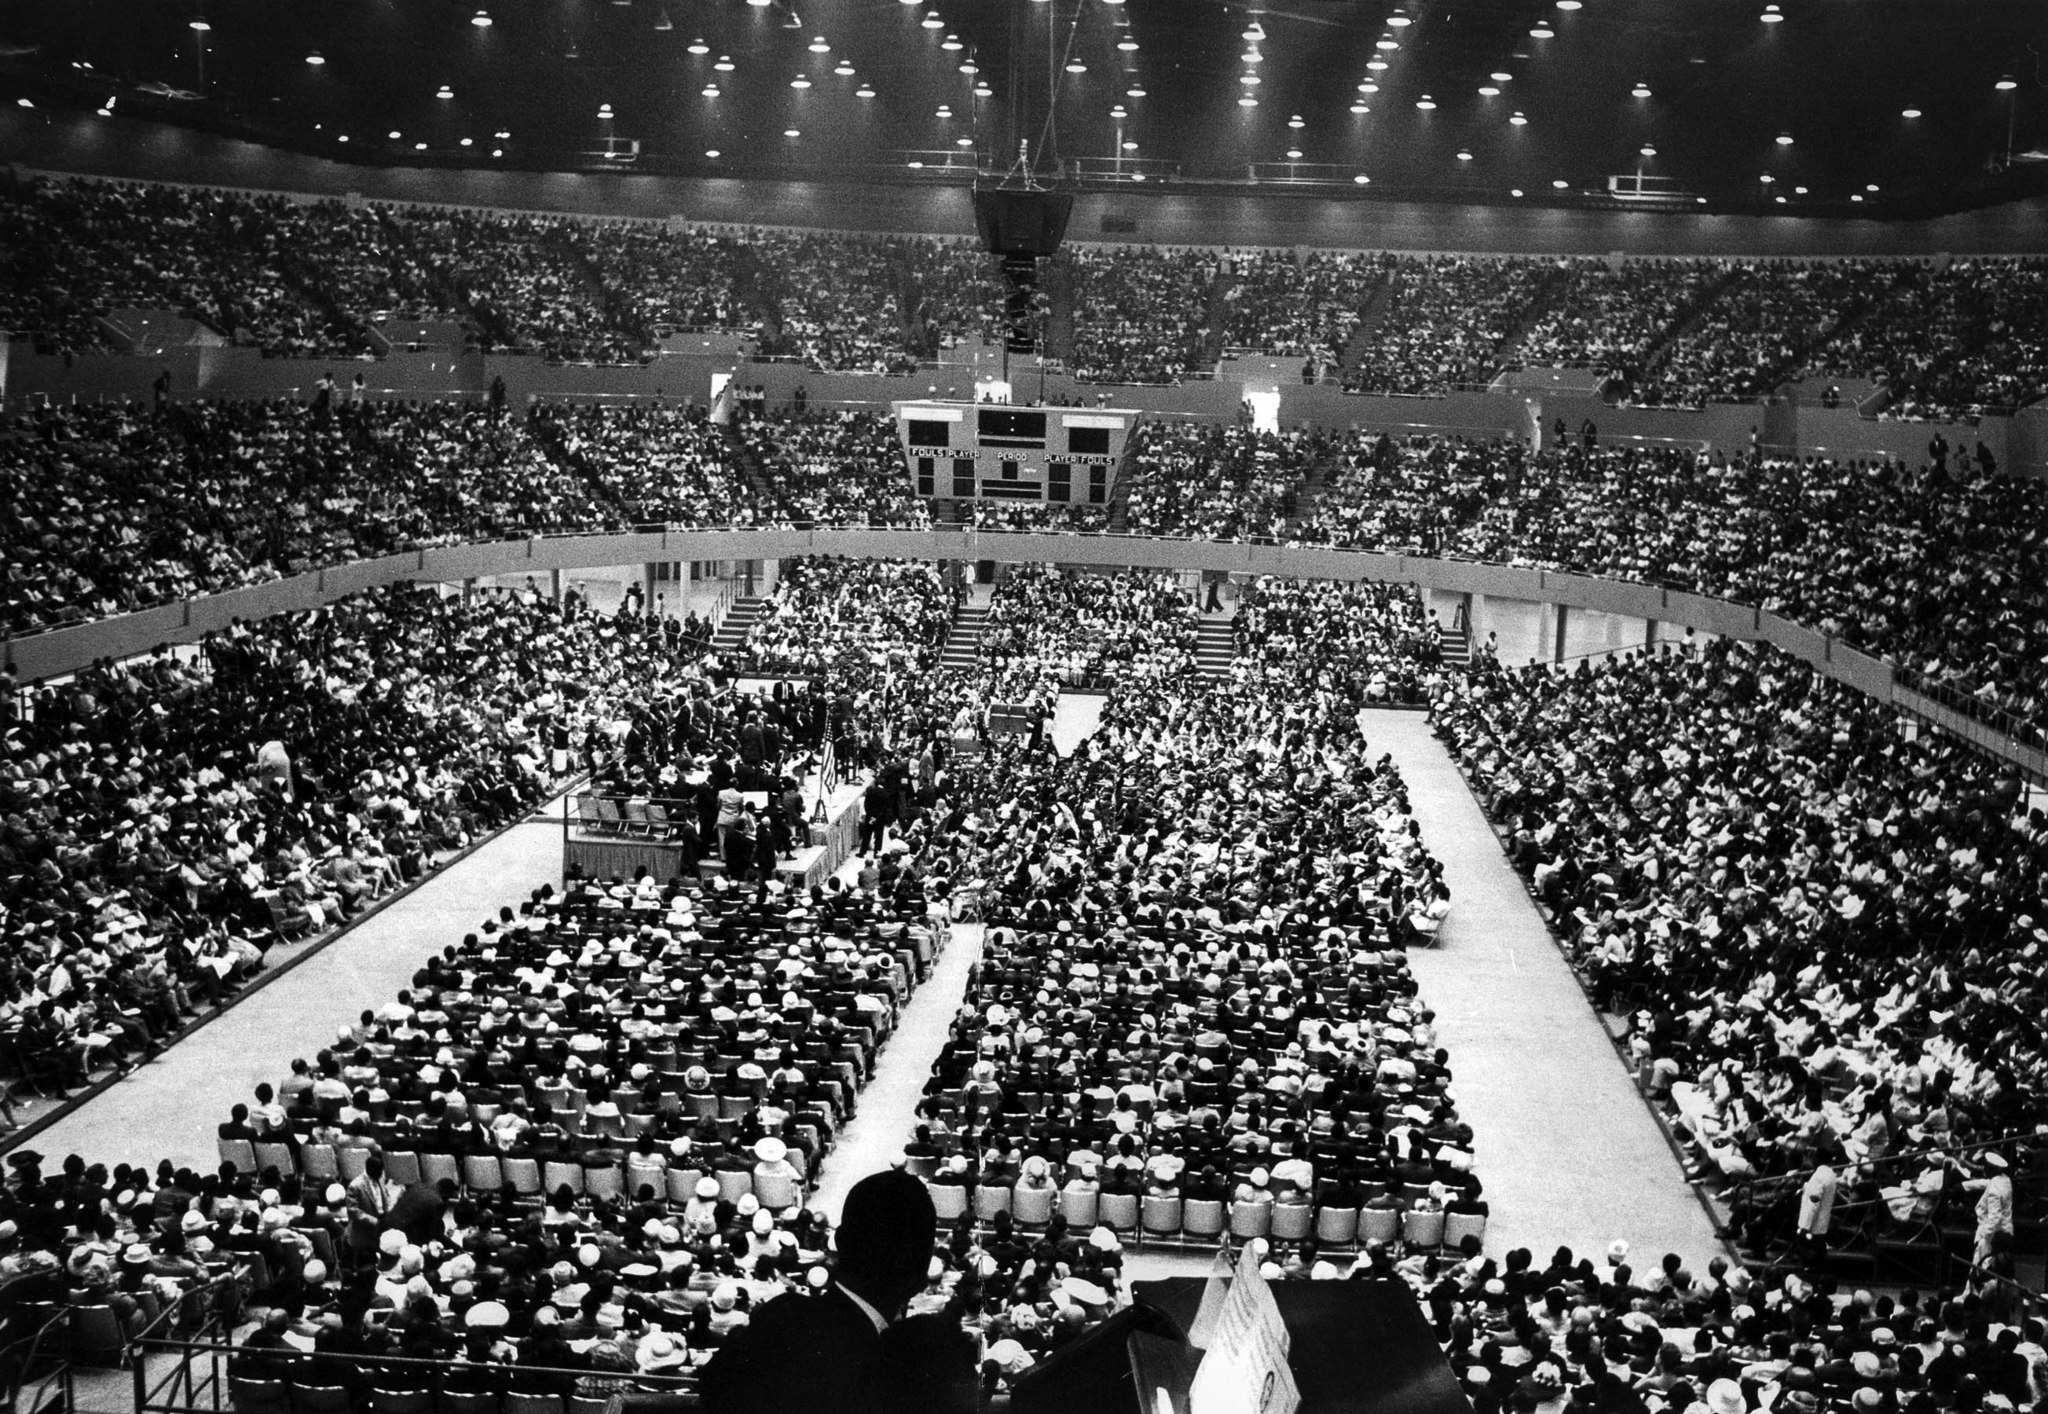 June 18, 1961: Interior of Sports Arena with crowd gathered to hear Rev. Martin Luther King, Jr. spe